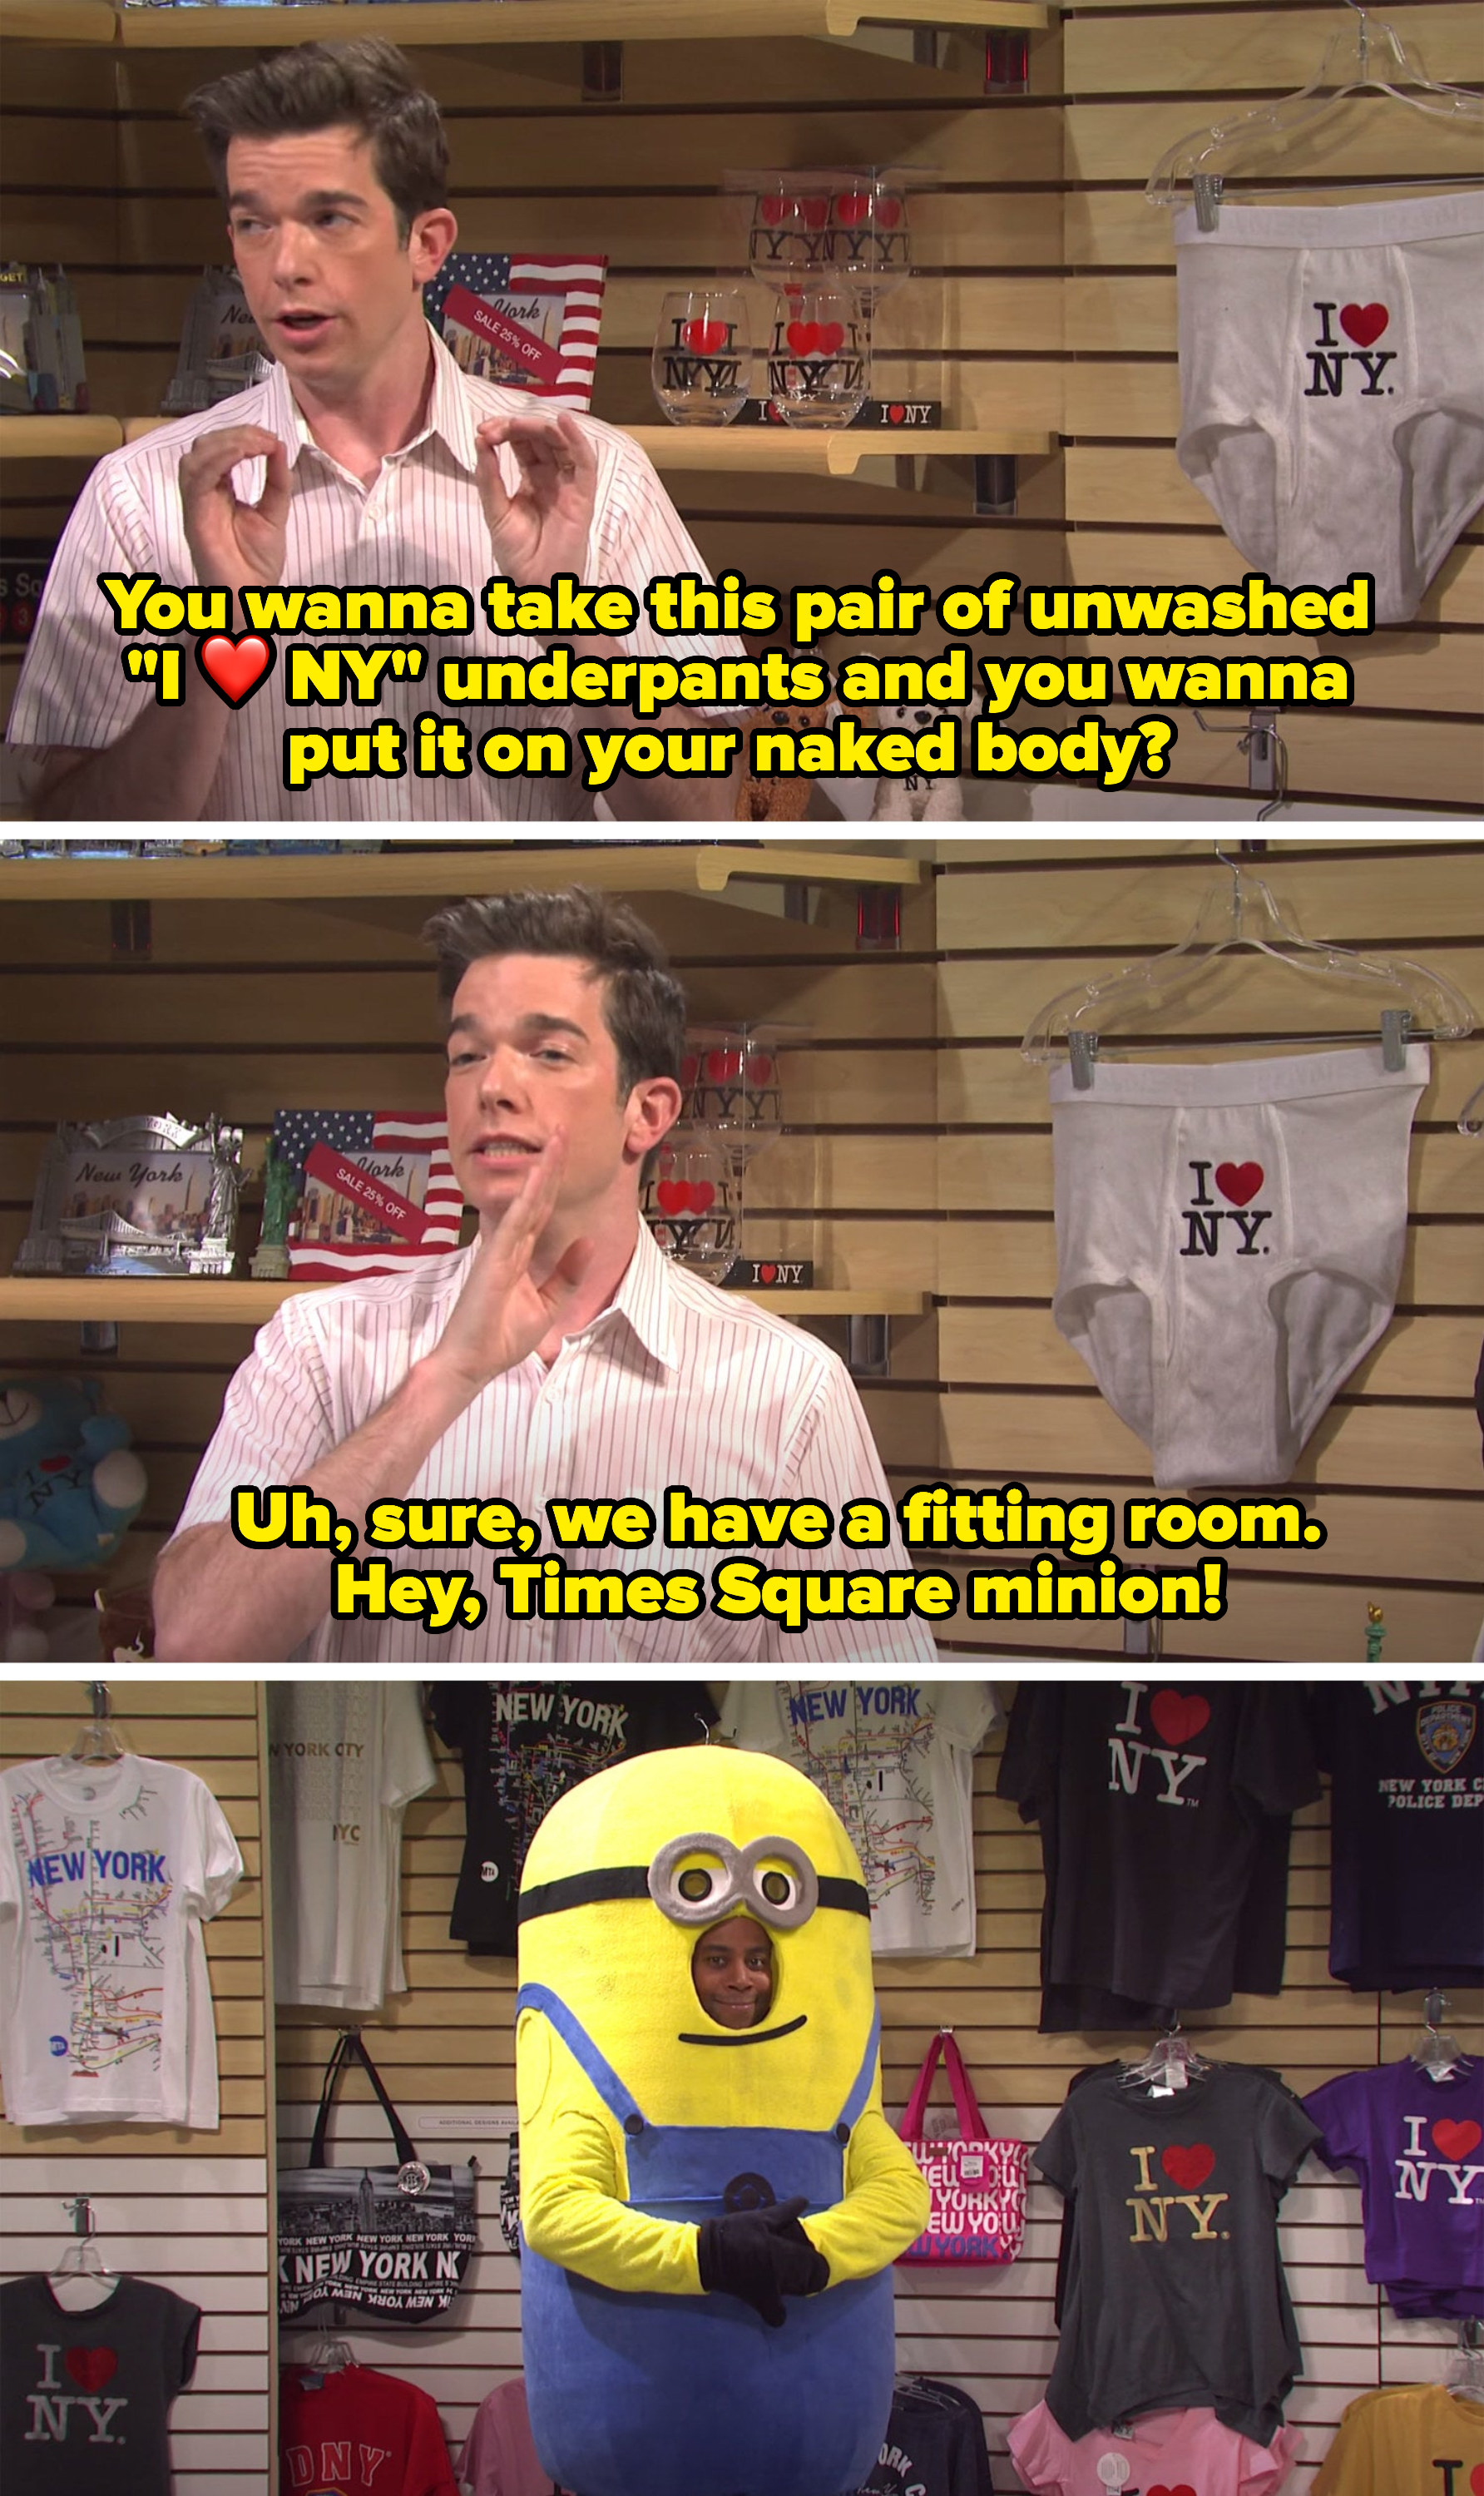 John introducing the Times Square minion to bring Pete to the dressing room.